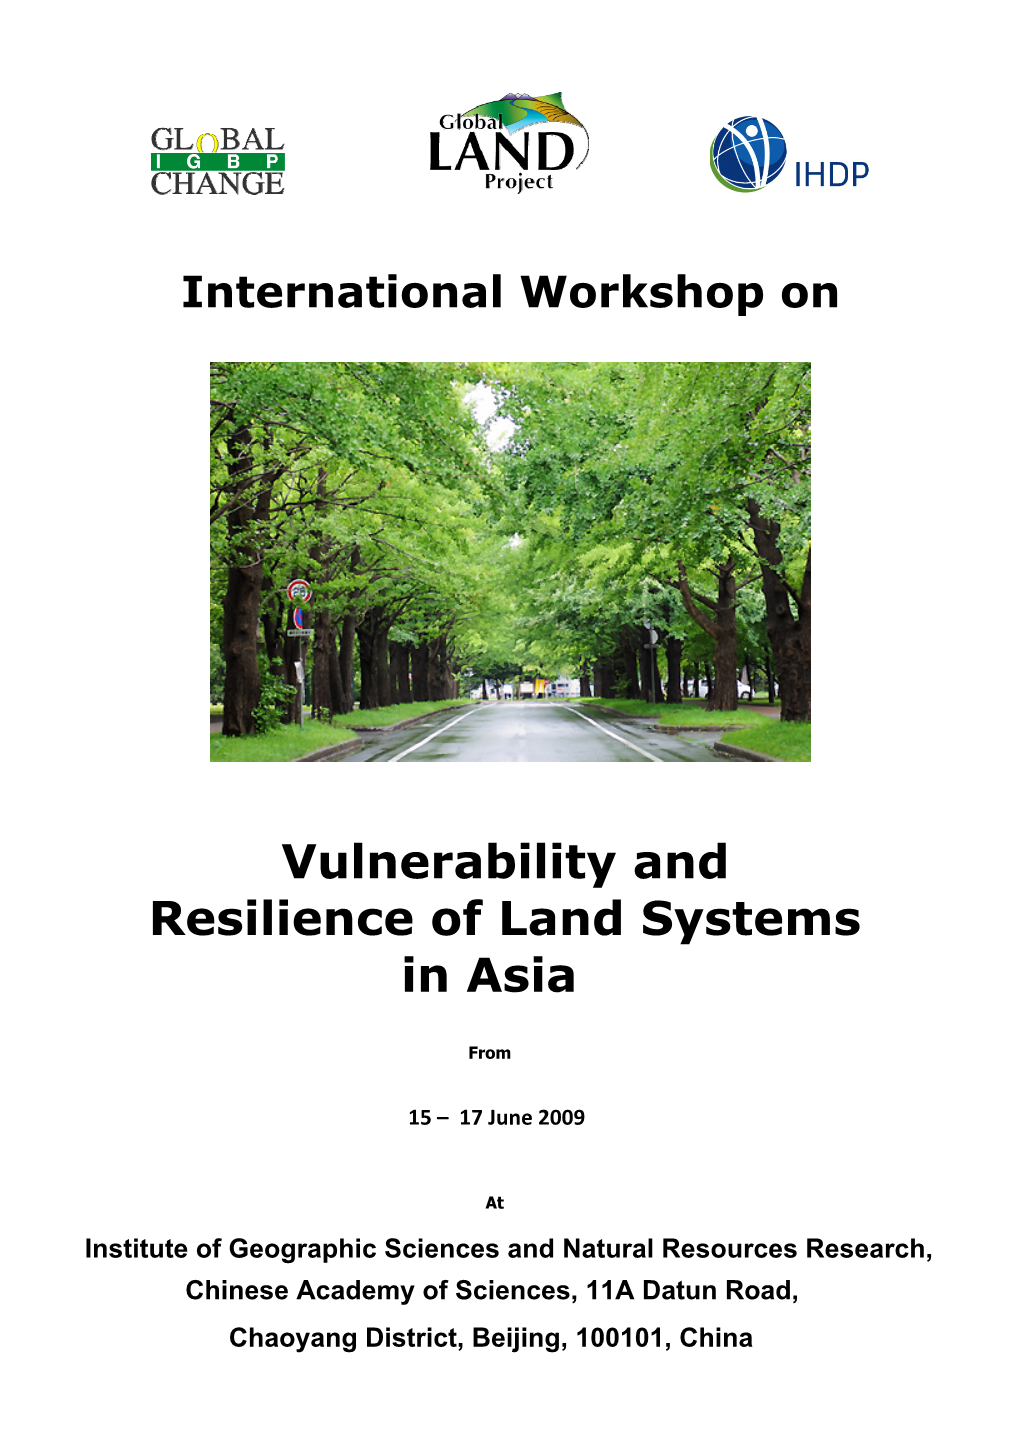 Vulnerability and Resilience of Land Systems in Asia